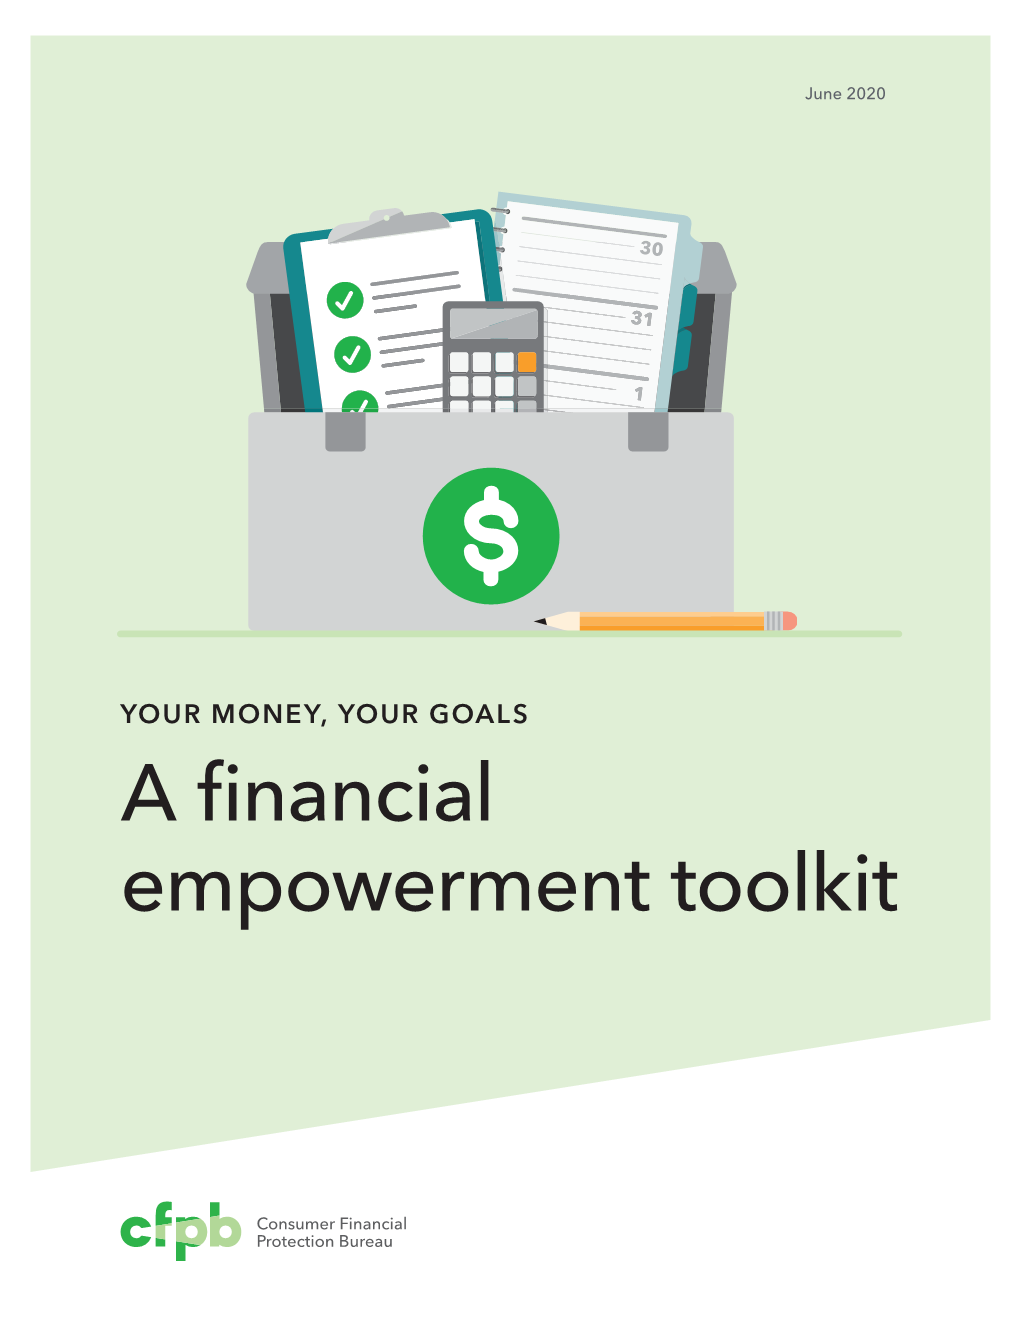 Your Money, Your Goals: a Financial Empowerment Toolkit!